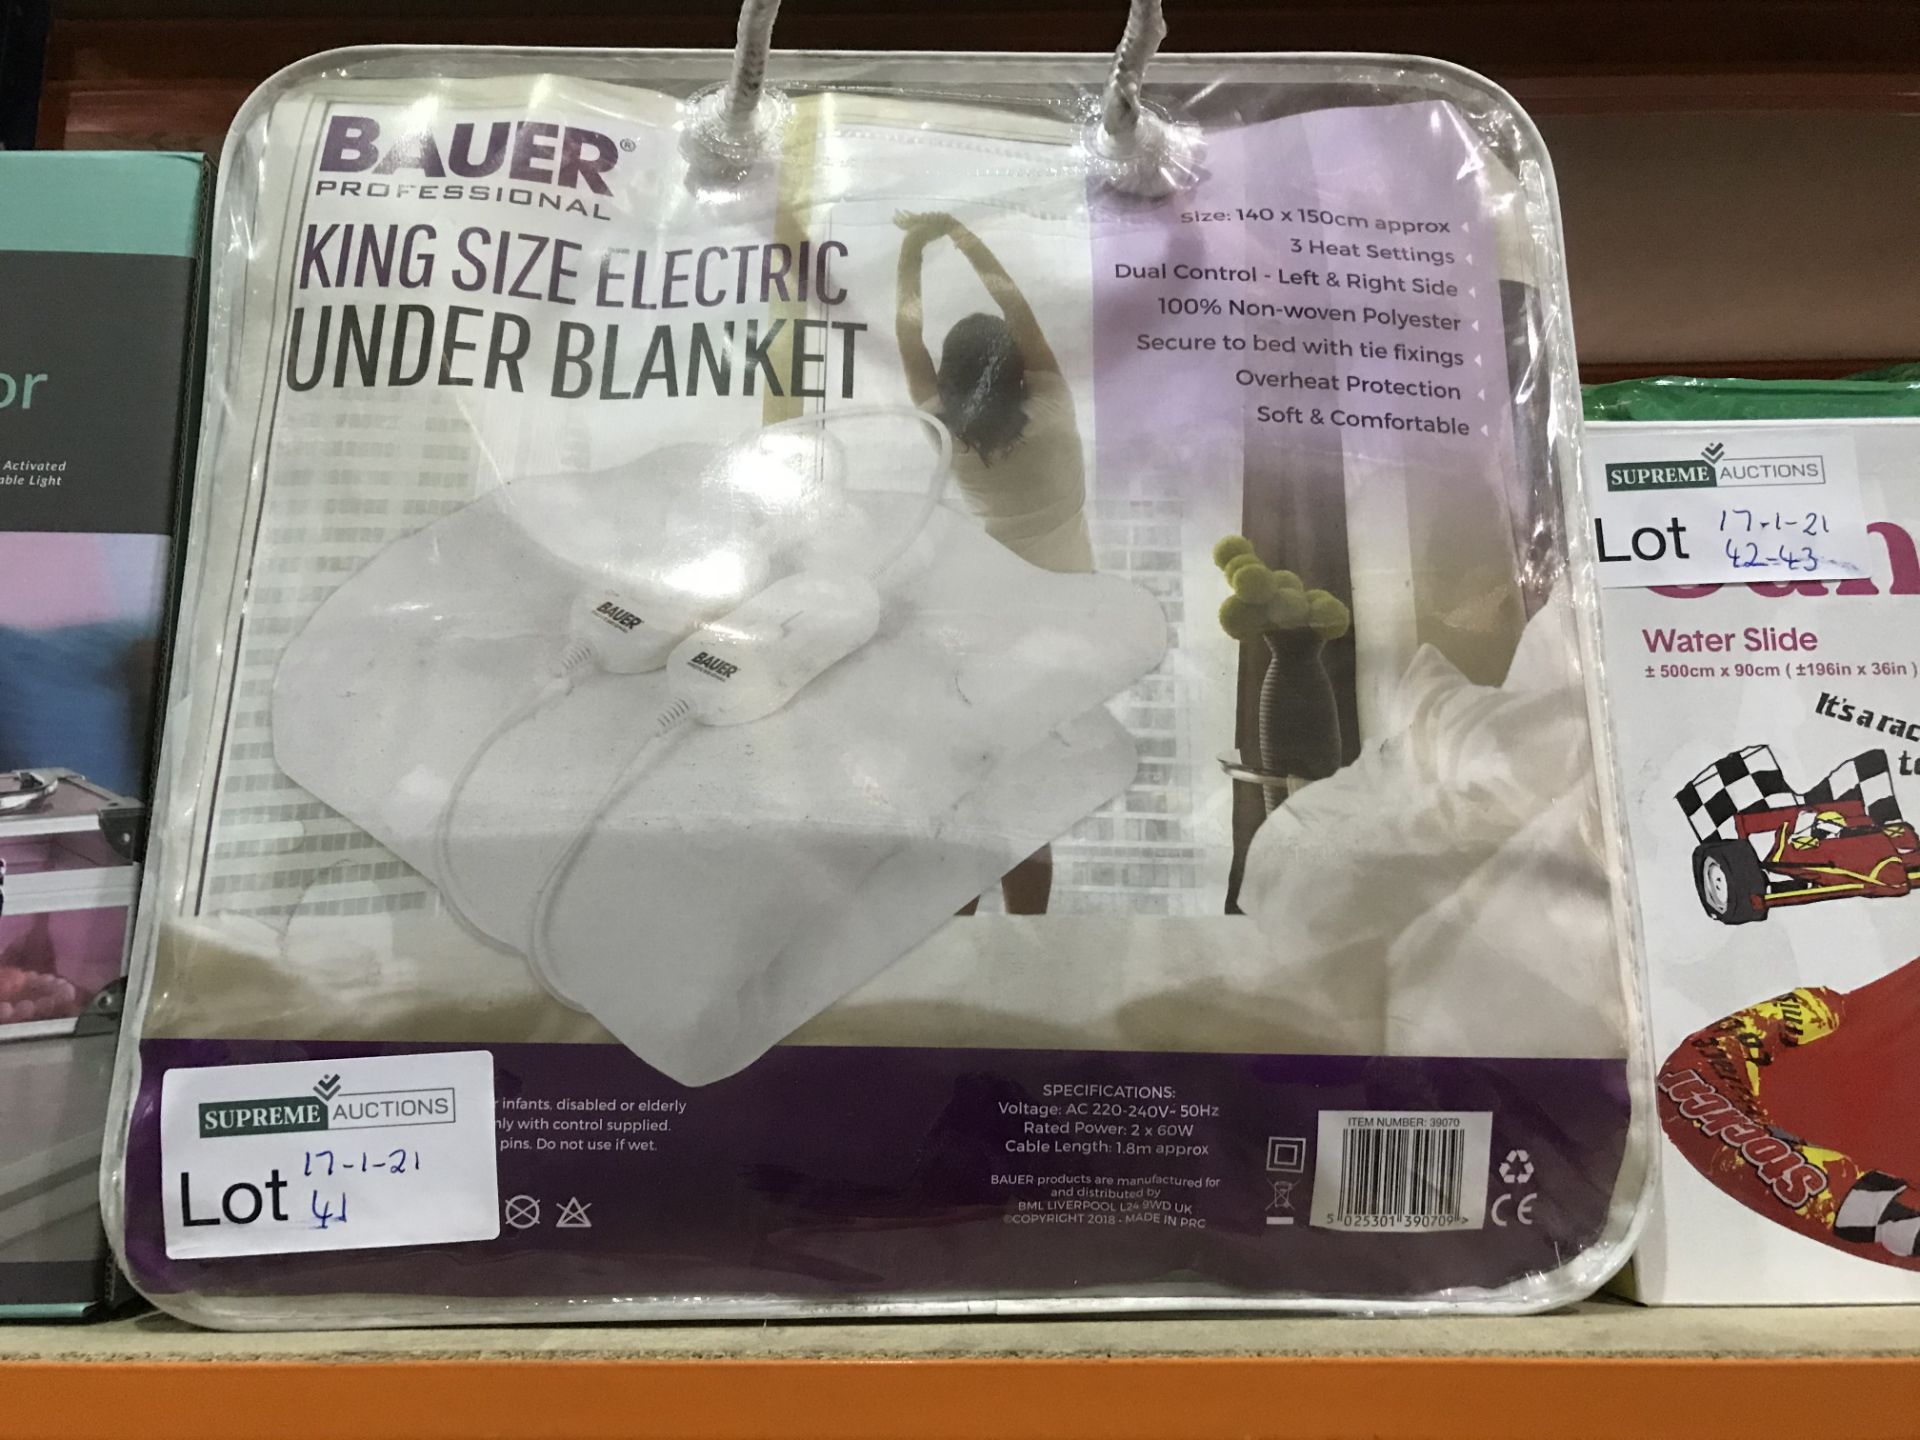 BAUER PROFESSIONAL KING SIZE ELECTRIC UNDER BLANKET